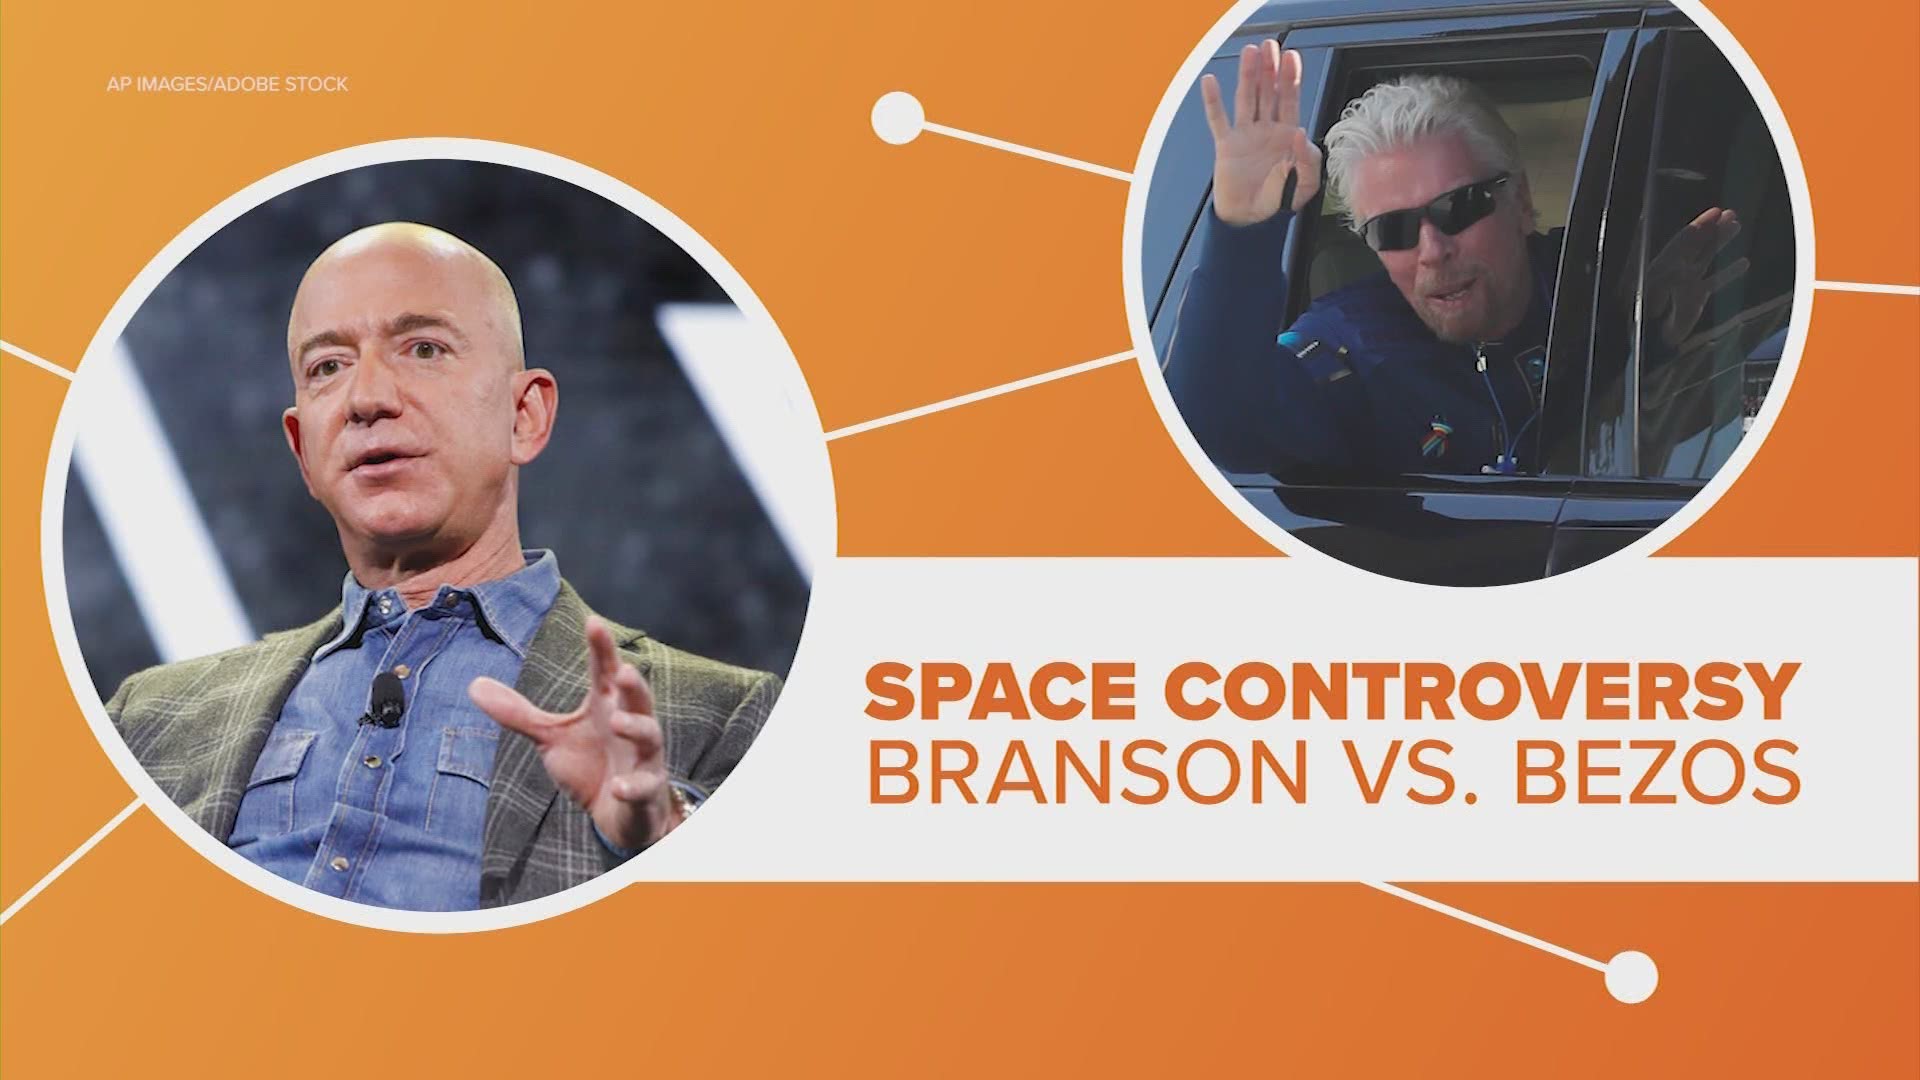 Richard Branson was the first to go to space in a craft he helped fund…or was he?